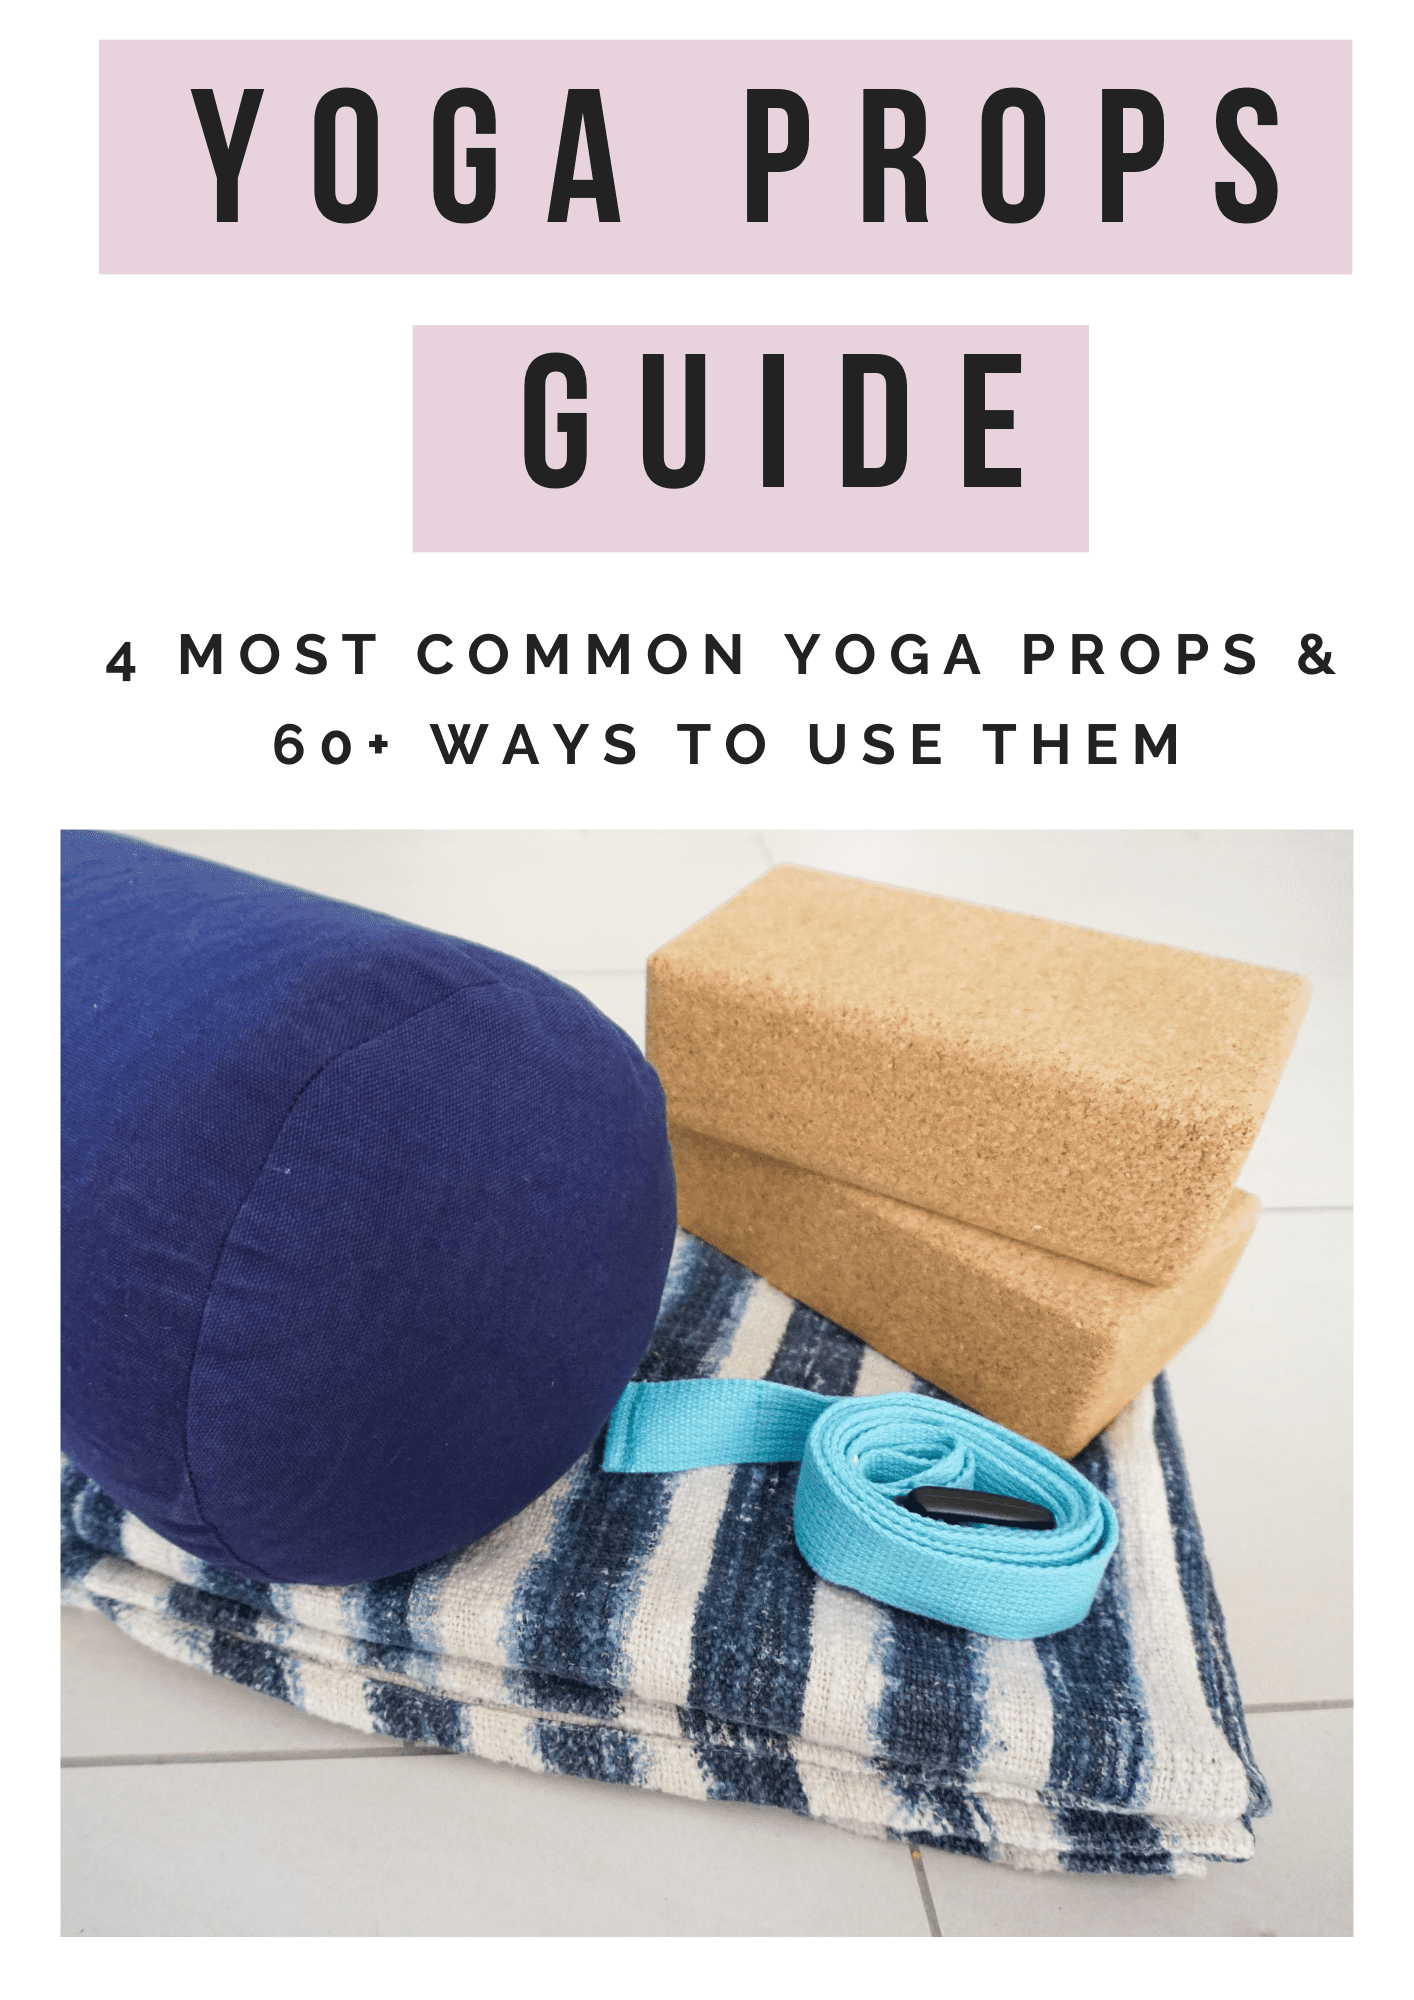 How to use yoga props for beginners